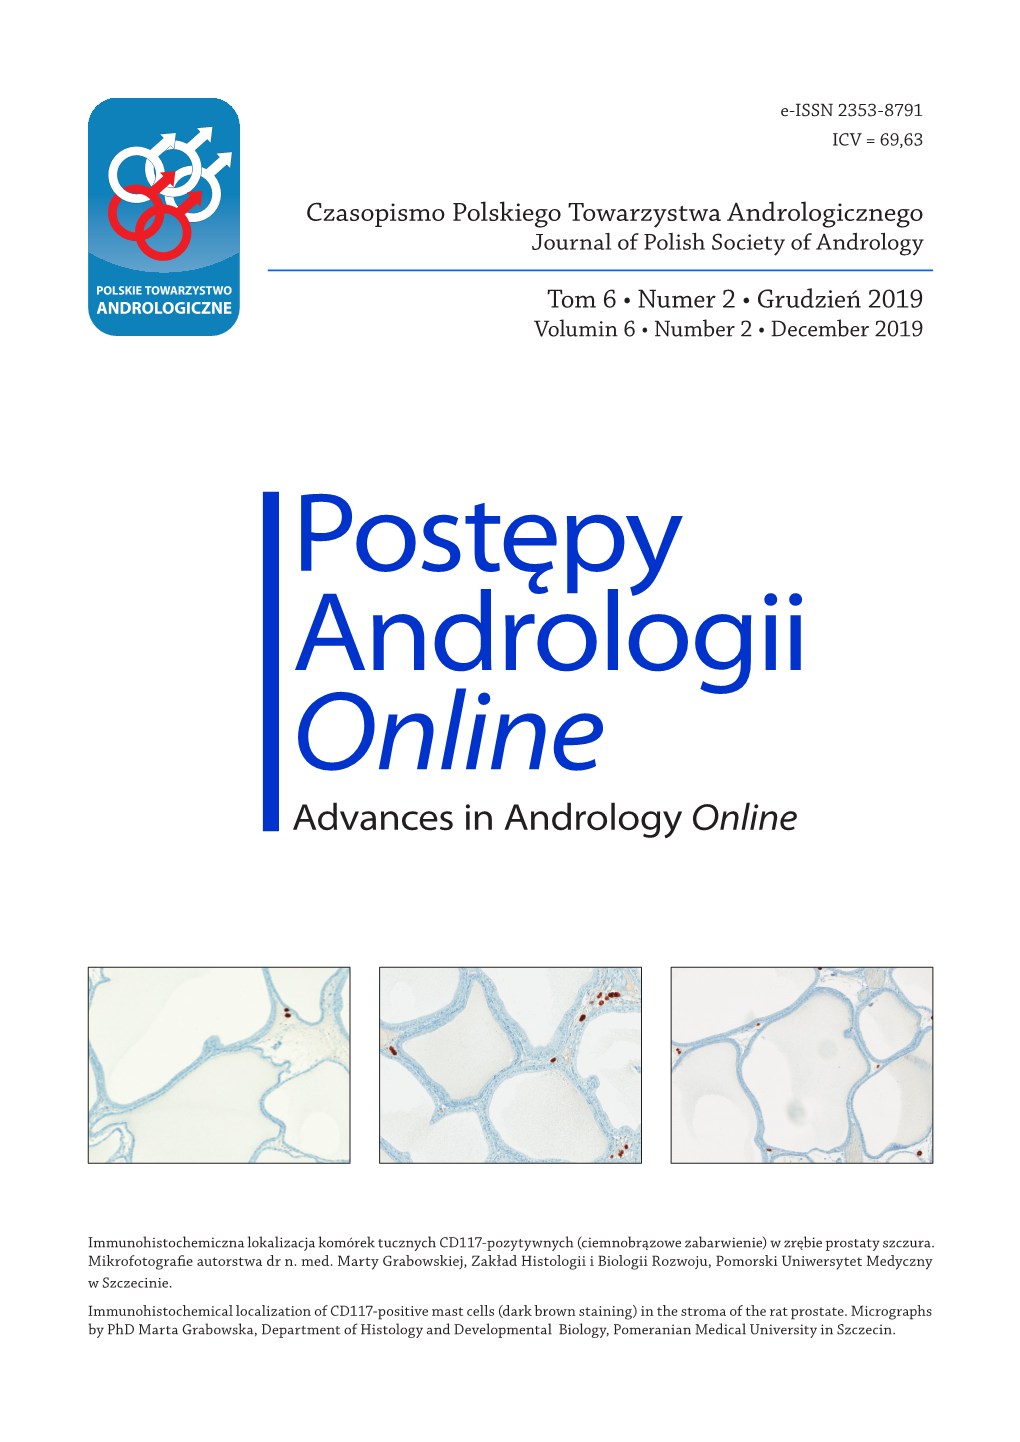 Postępy Andrologii Online Advances in Andrology Online